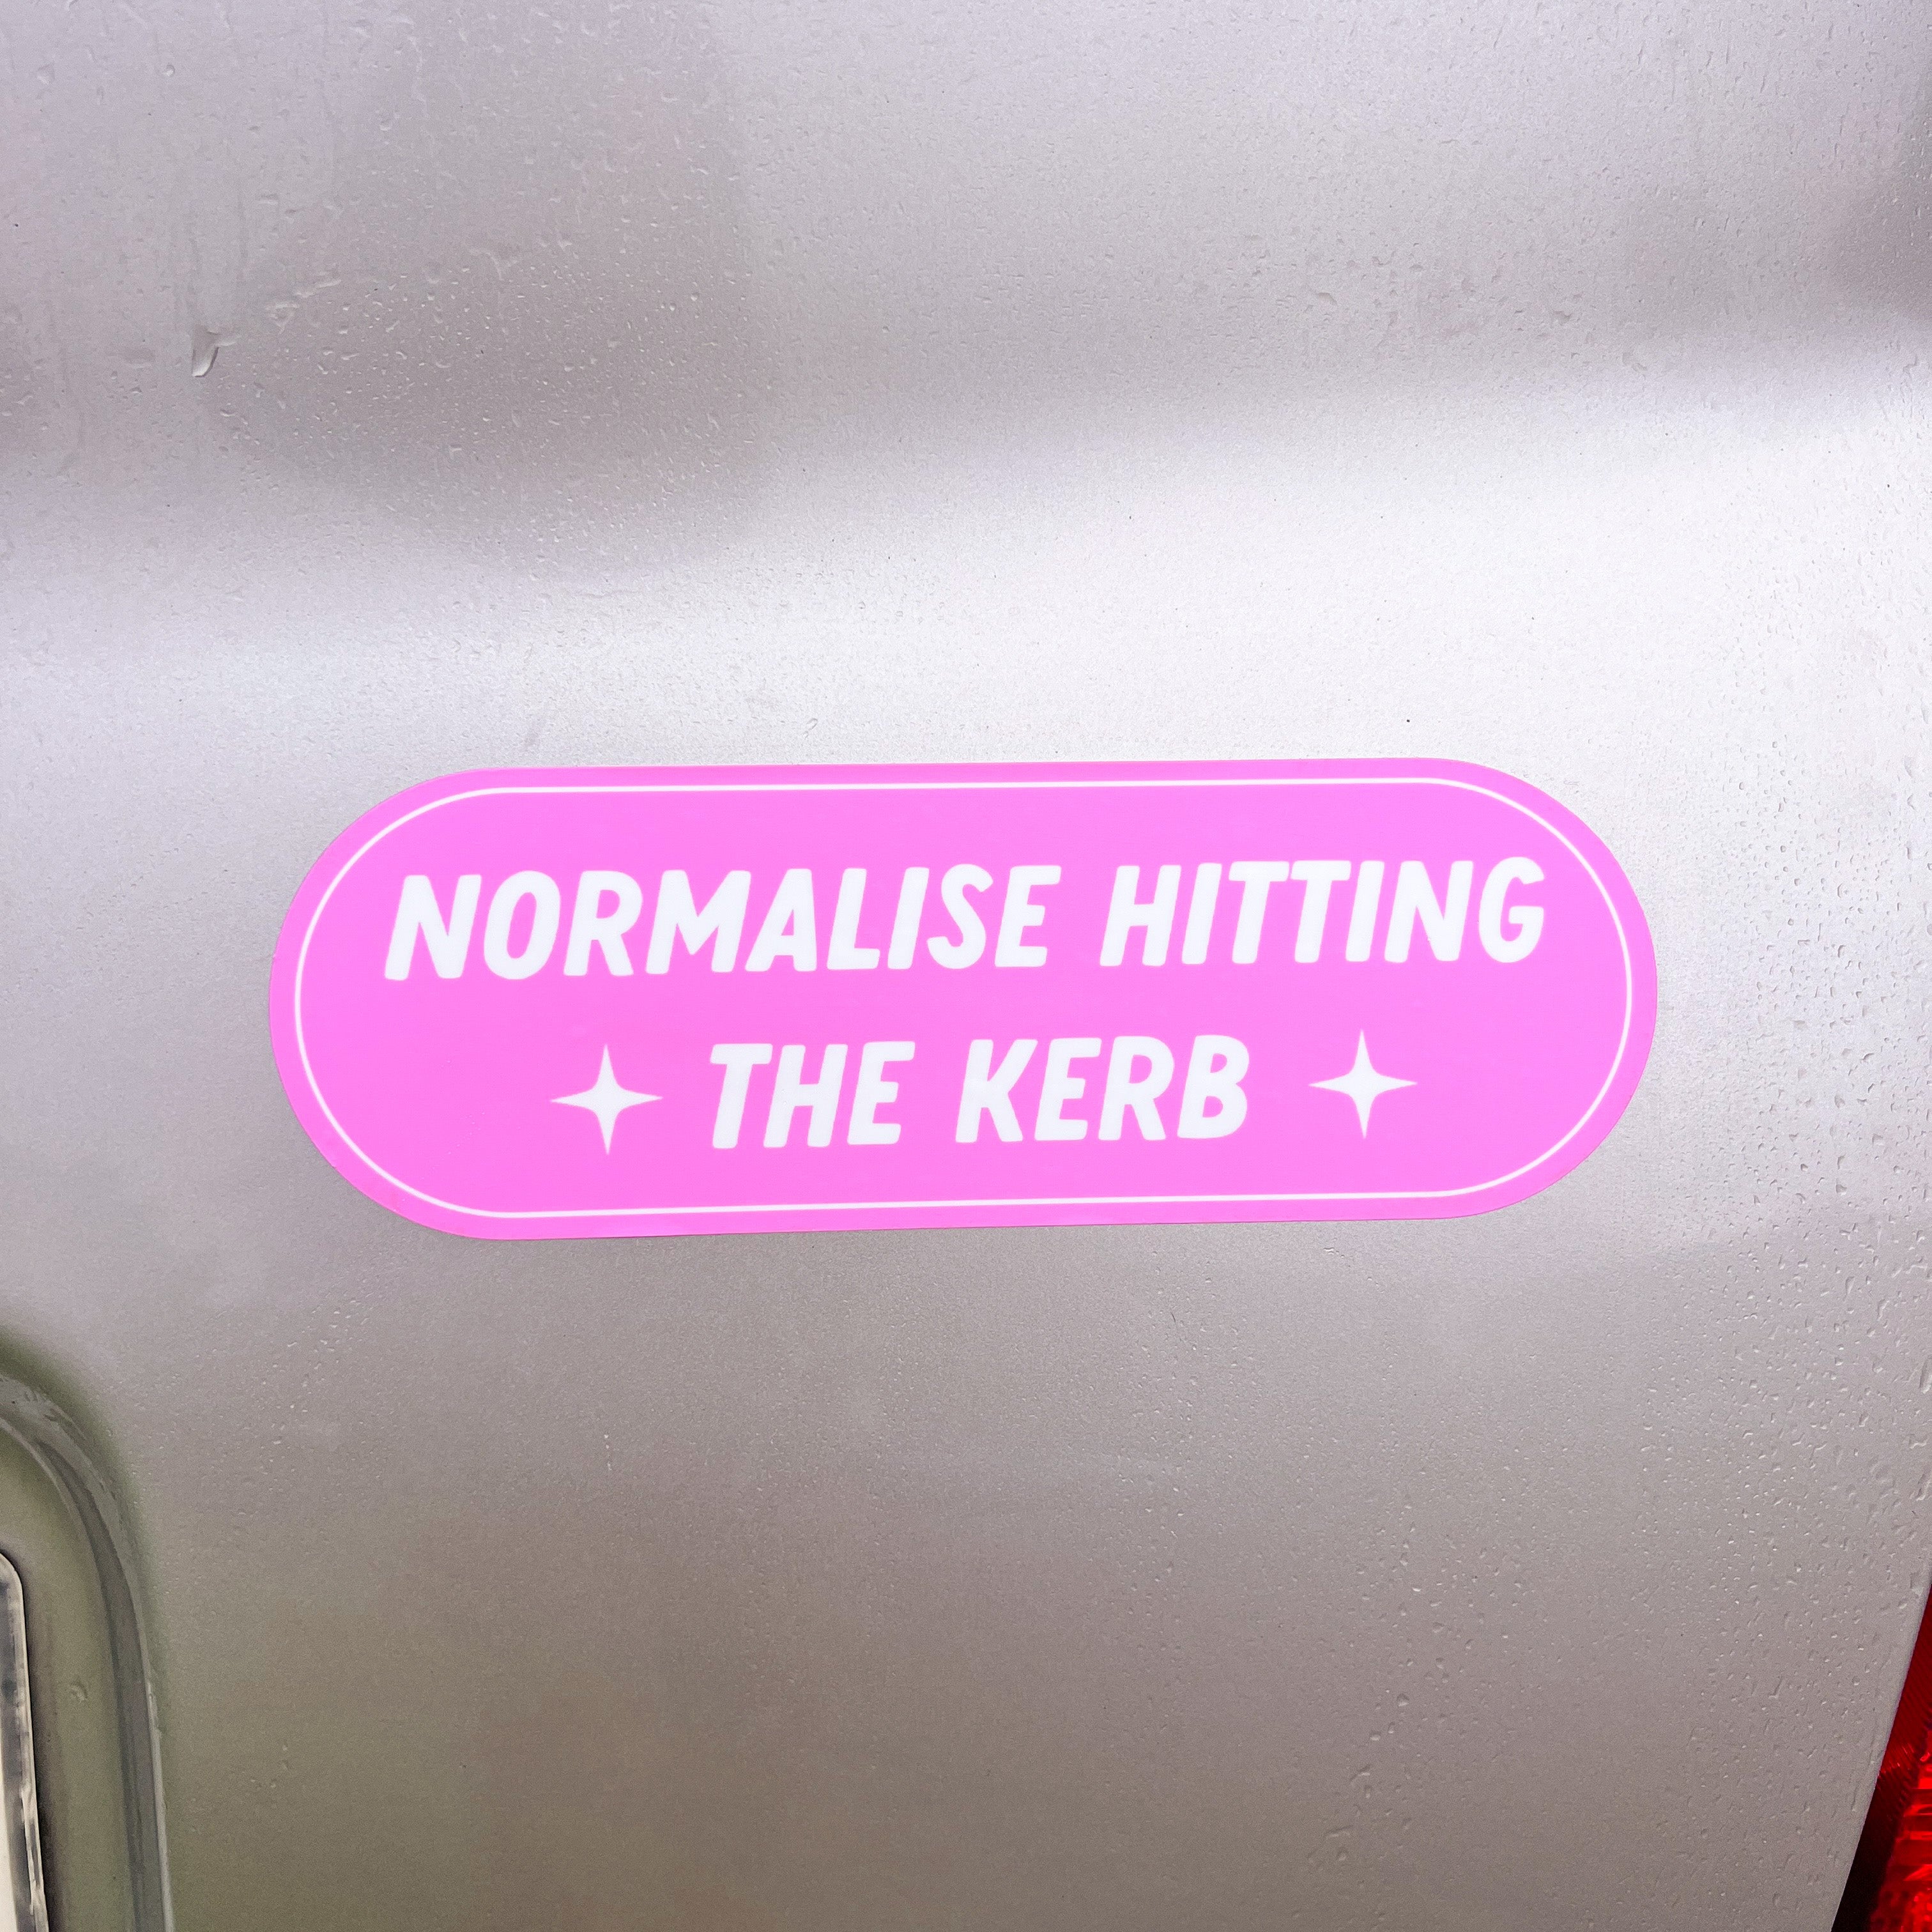 Normalise hitting the kerb bumper sticker